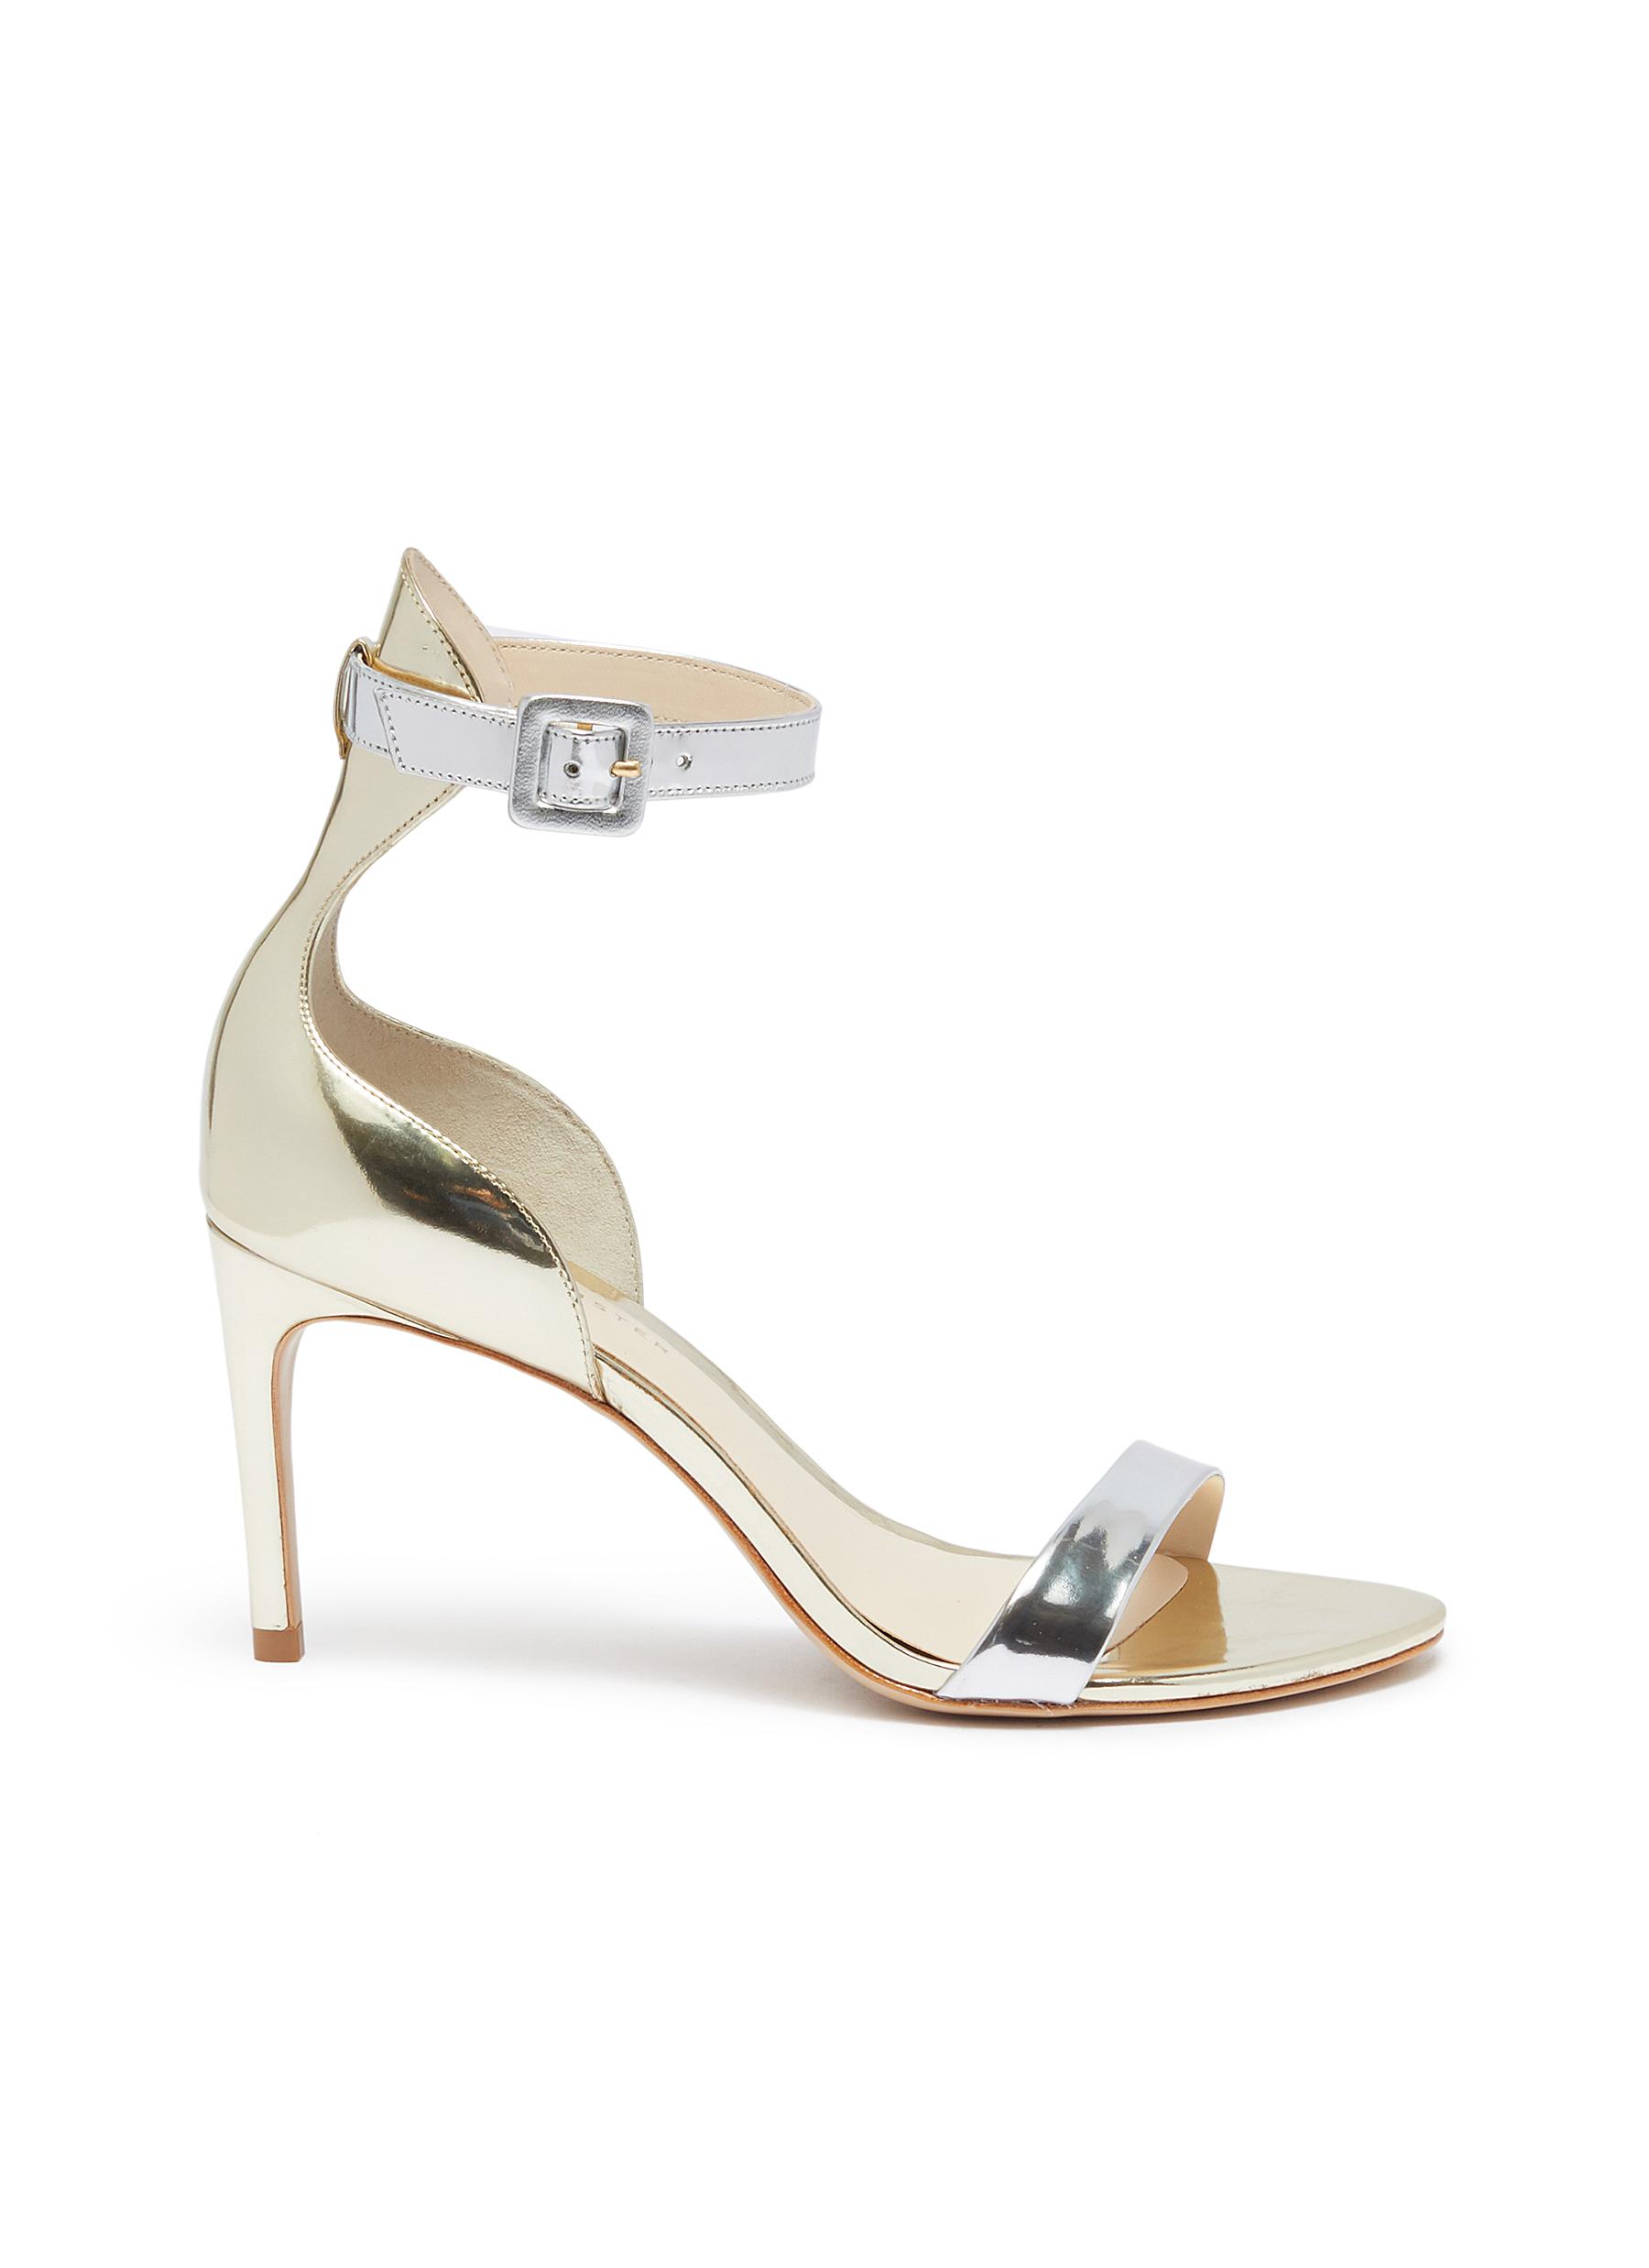 Nicole ankle strap mirror leather sandals by Sophia Webster